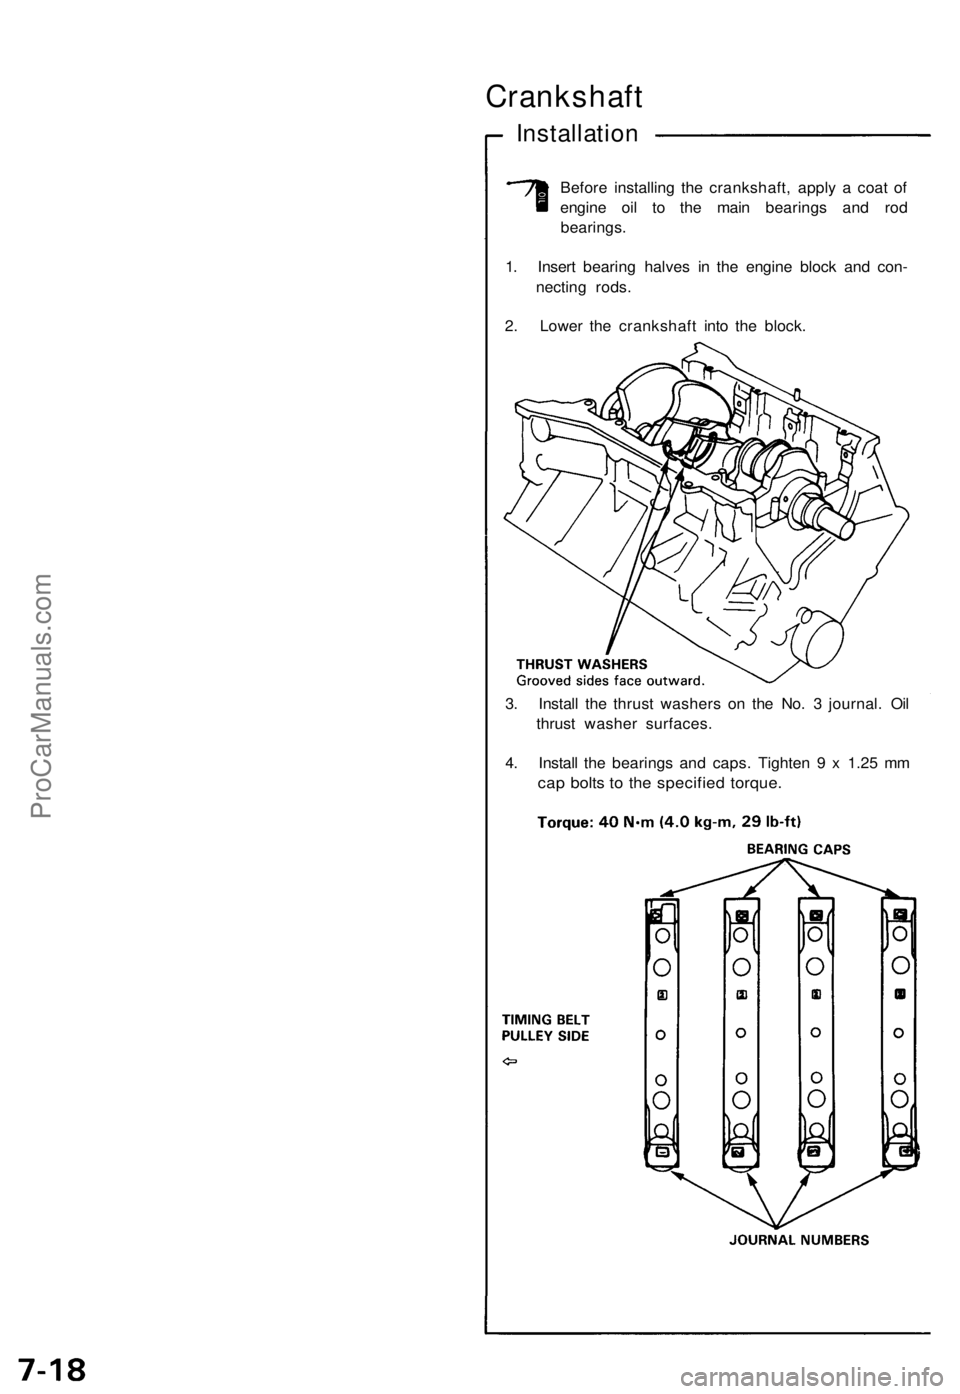 ACURA NSX 1991  Service Repair Manual 
Crankshaft

Installation

Before installing the crankshaft, apply a coat of

engine oil to the main bearings and rod

bearings.

1. Insert bearing halves in the engine block and con-

necting rods.

